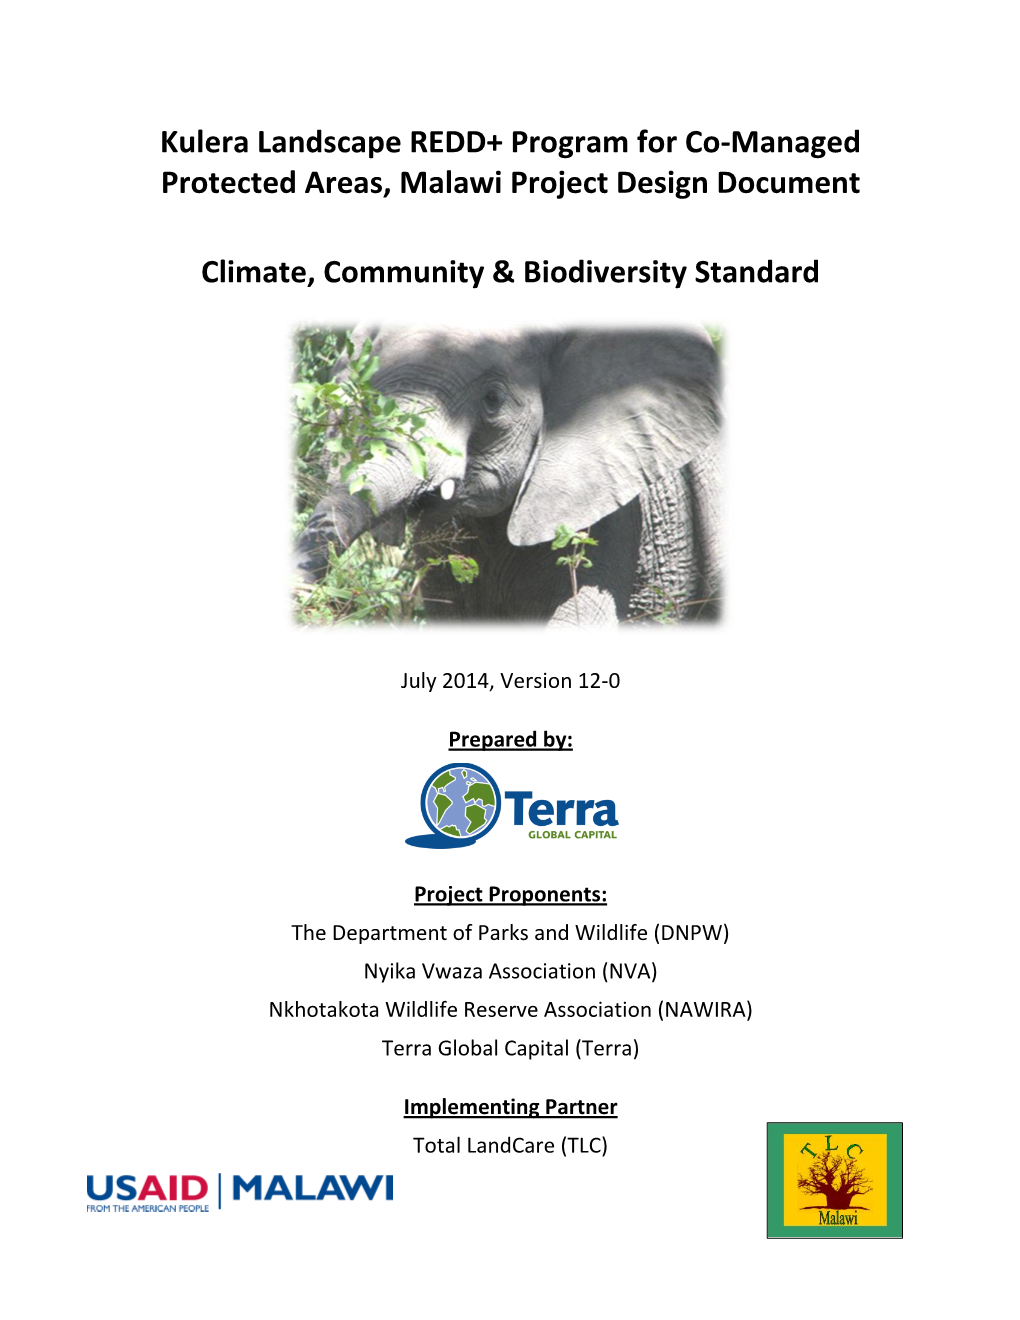 Kulera Landscape REDD+ Program for Co-Managed Protected Areas, Malawi Project Design Document